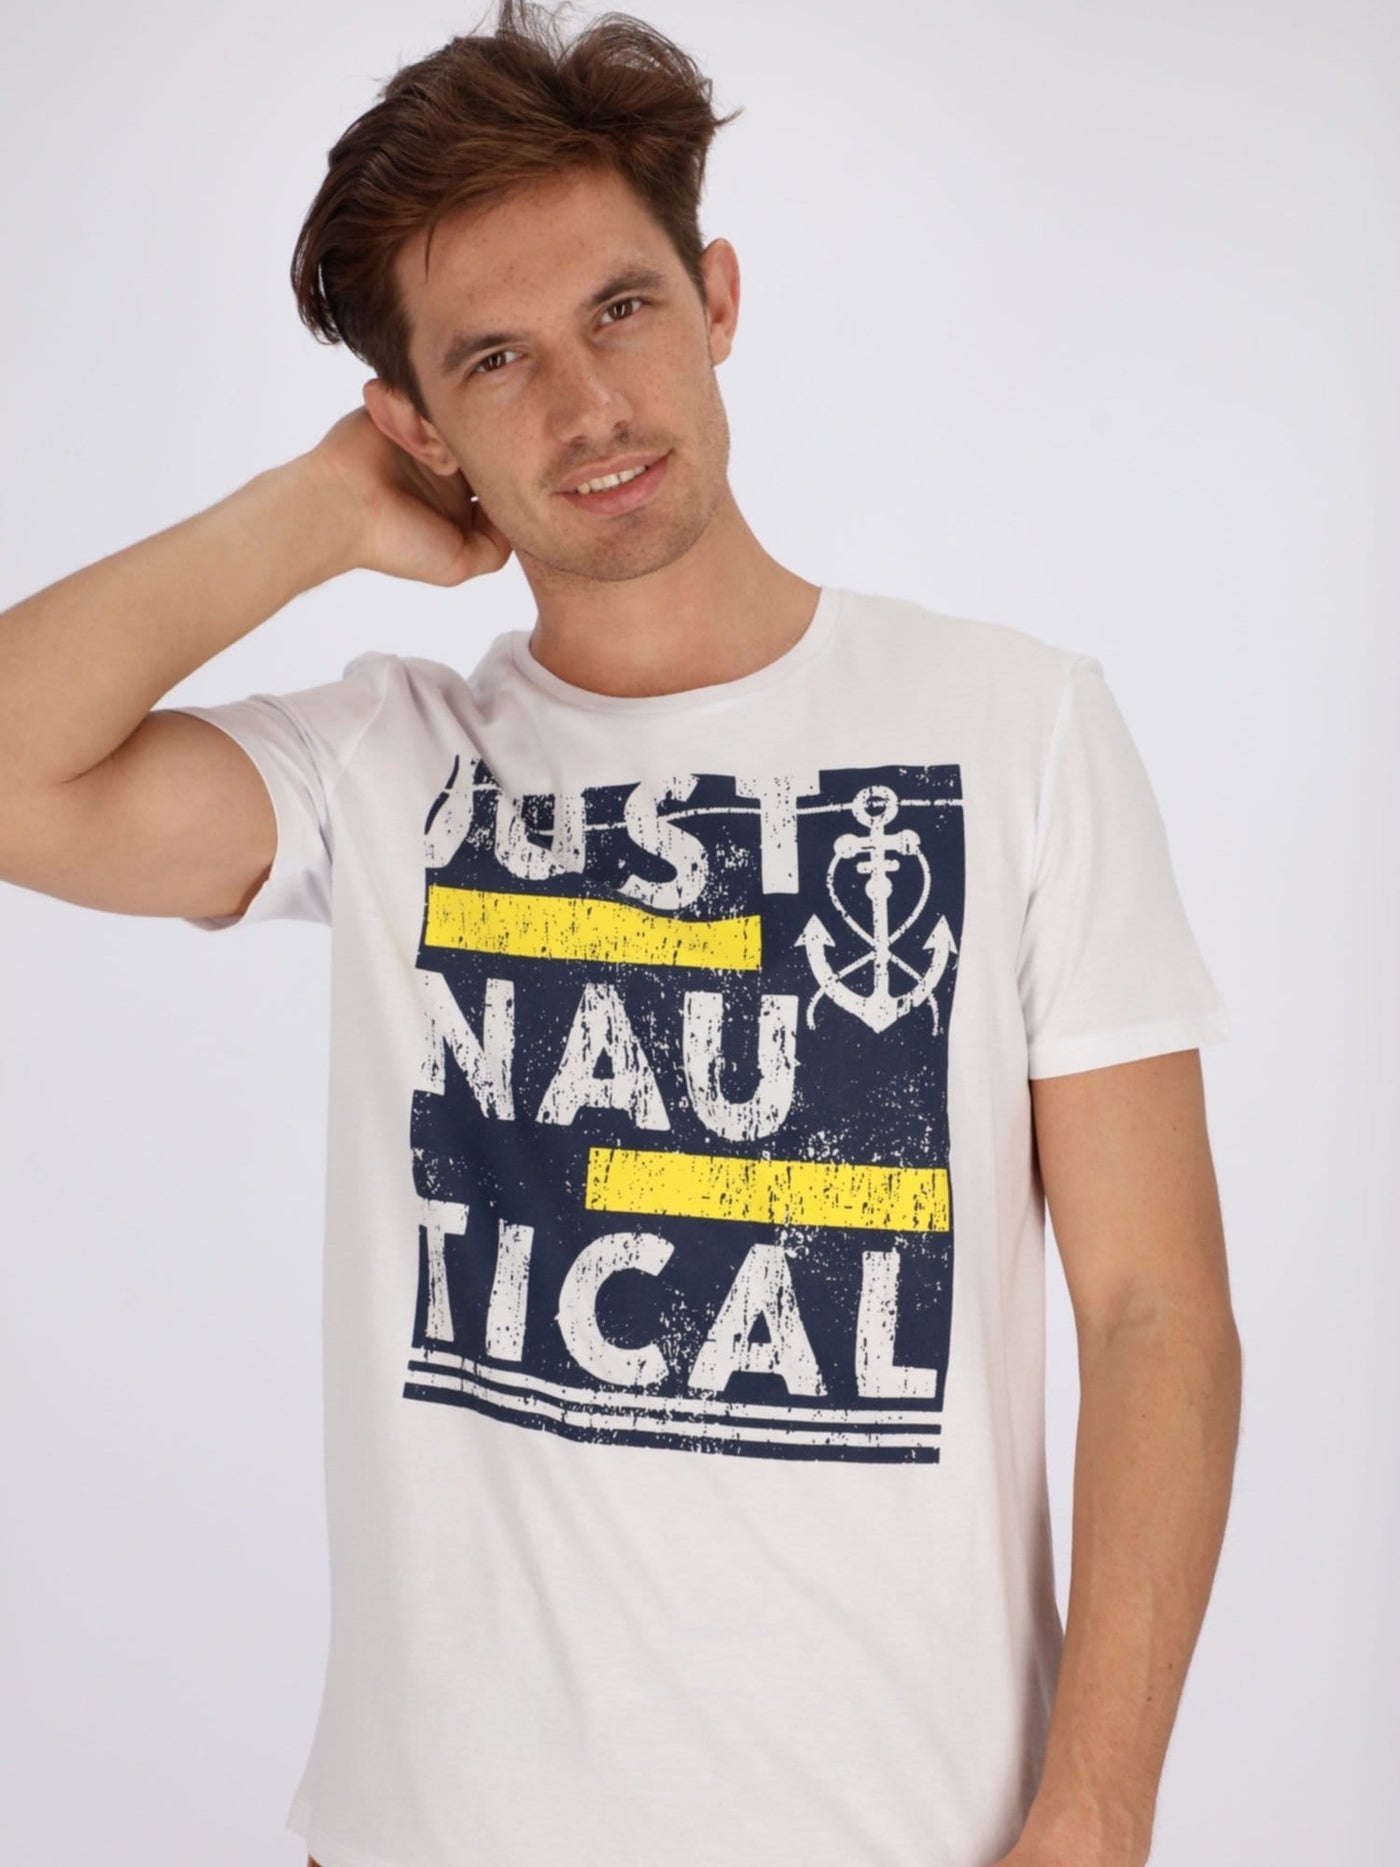 OR T-Shirts White / S Just Nautical Front Text Print Short Sleeve T-Shirt